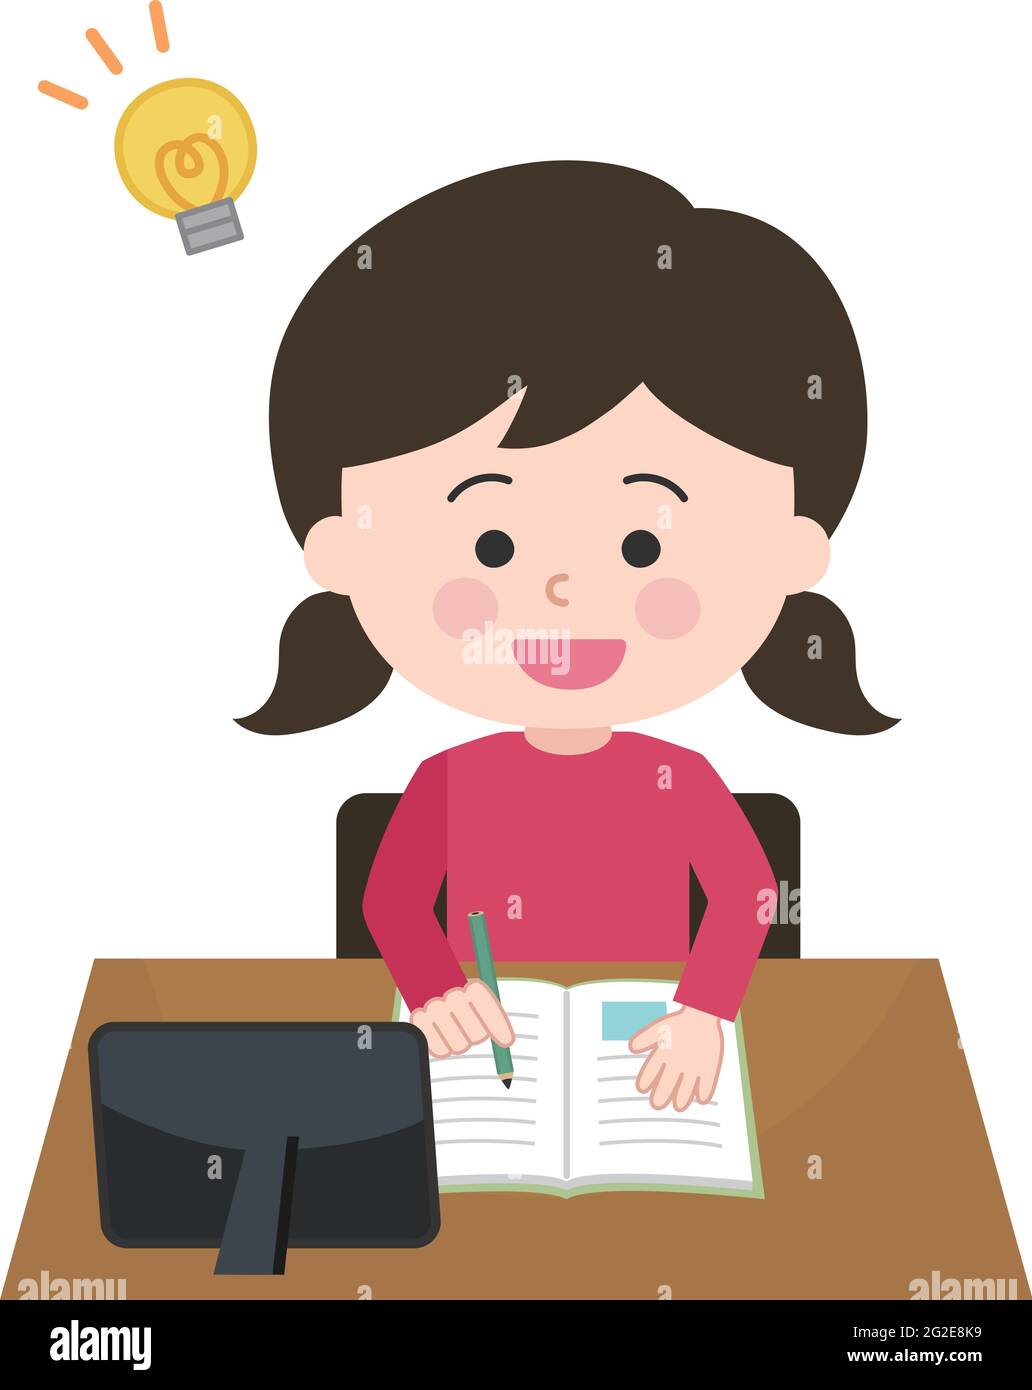 A girl having distance learning on her tablet. Vector illustration isolated on white background. Stock Vector